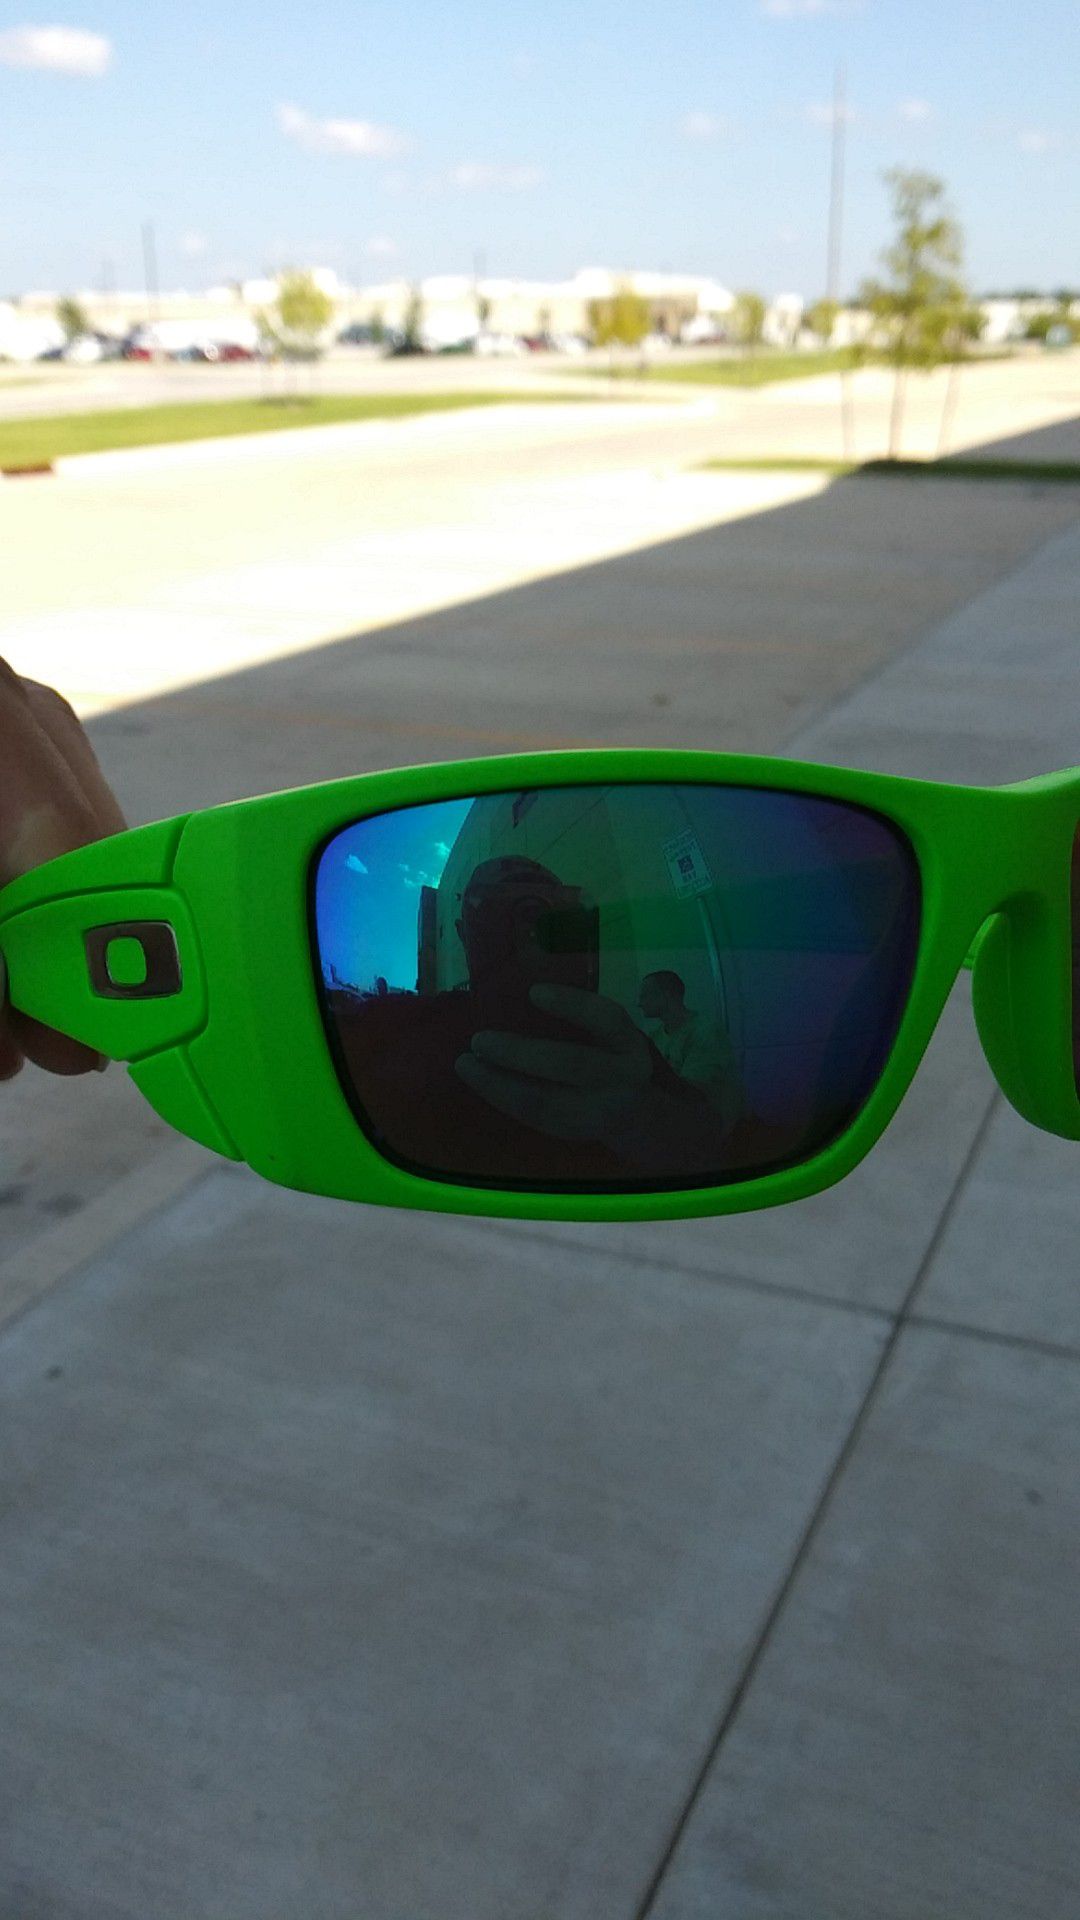 Oakley fuel-cell glasses